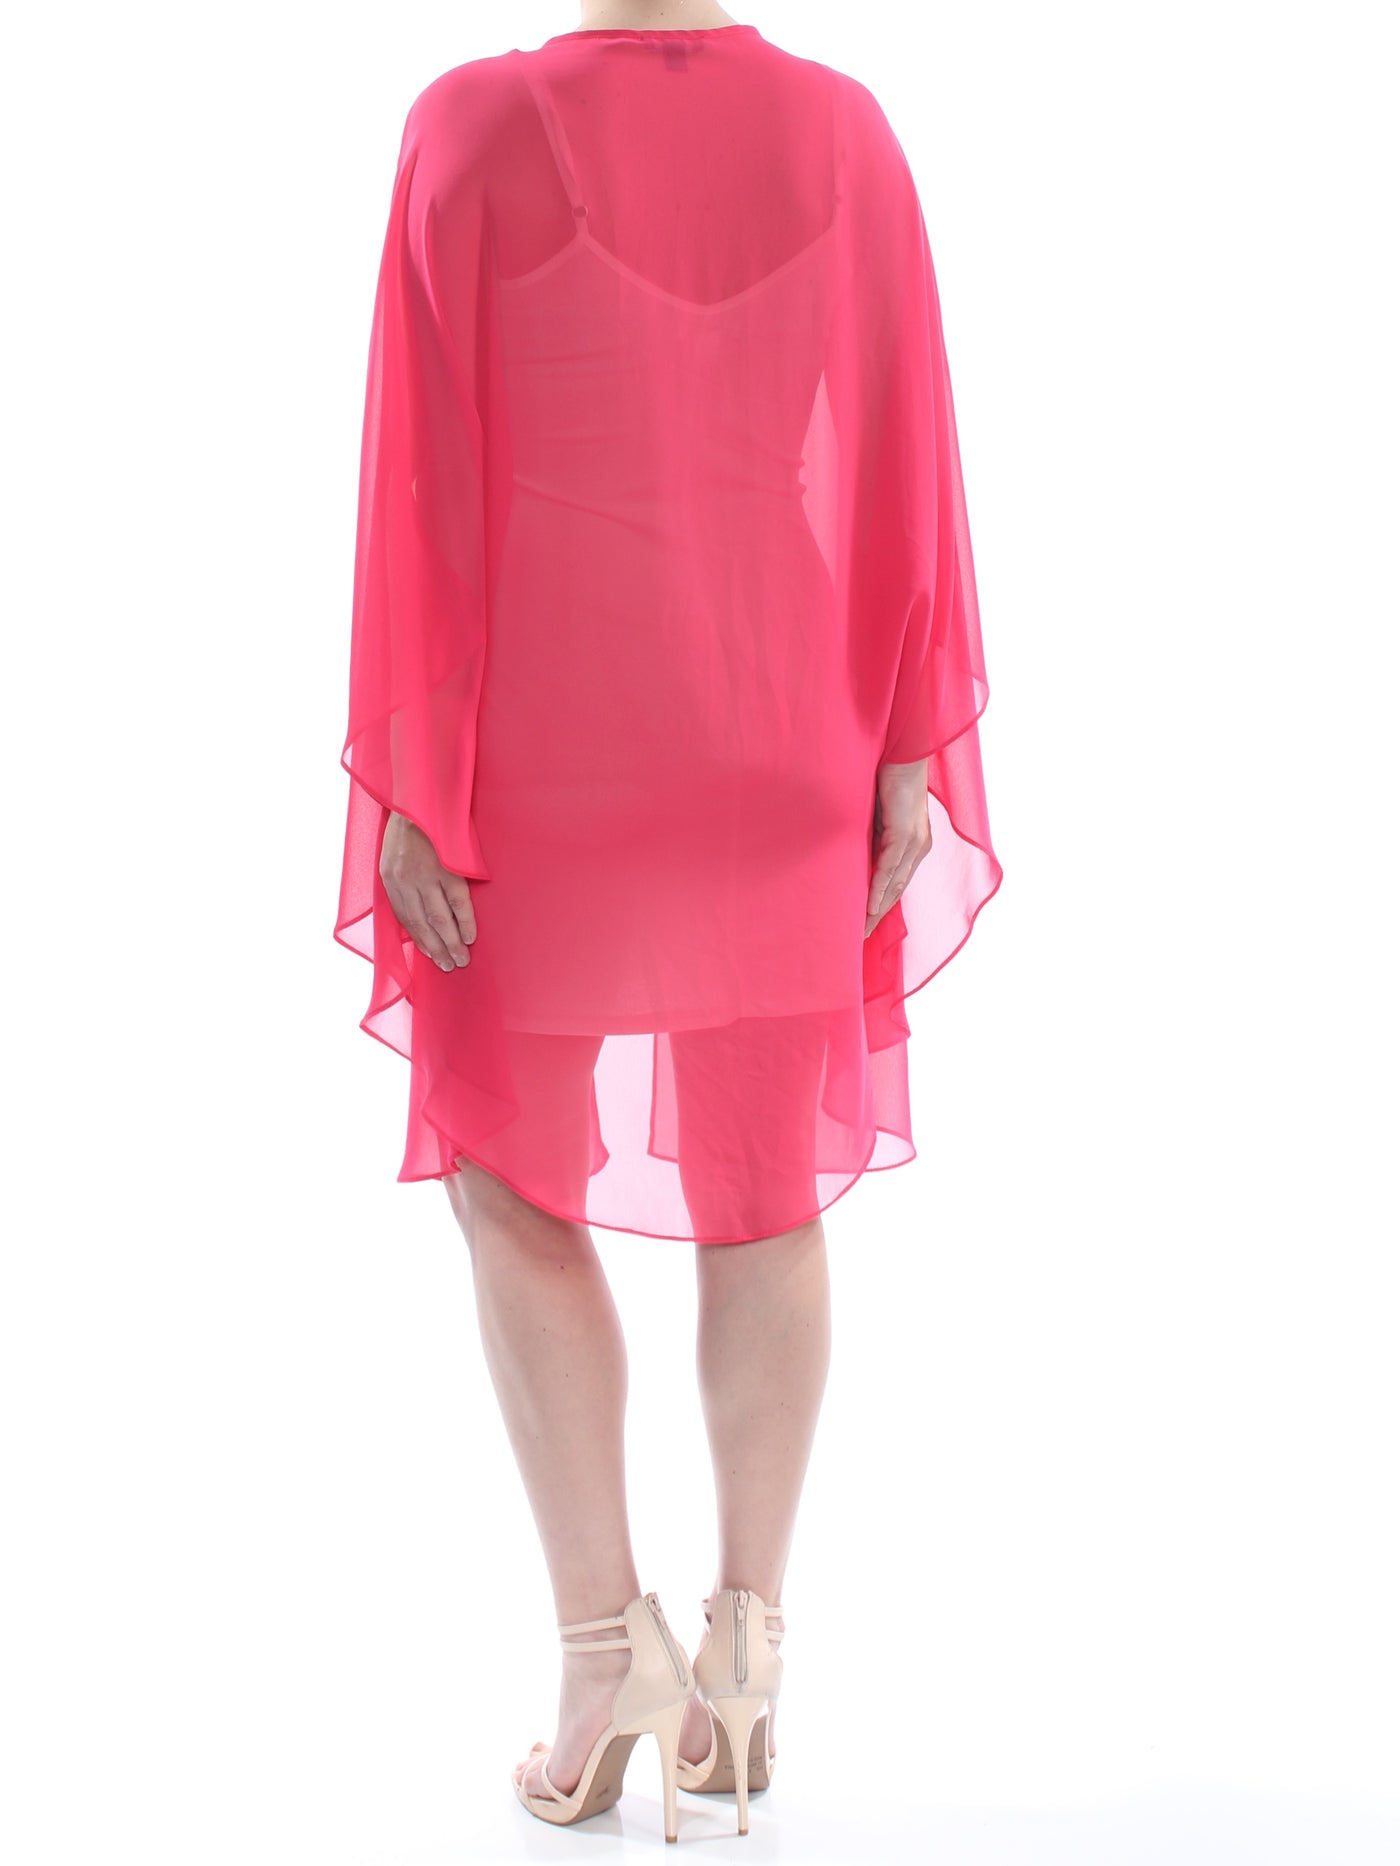 SLNY Womens Pink Sheer Capelet Party Top